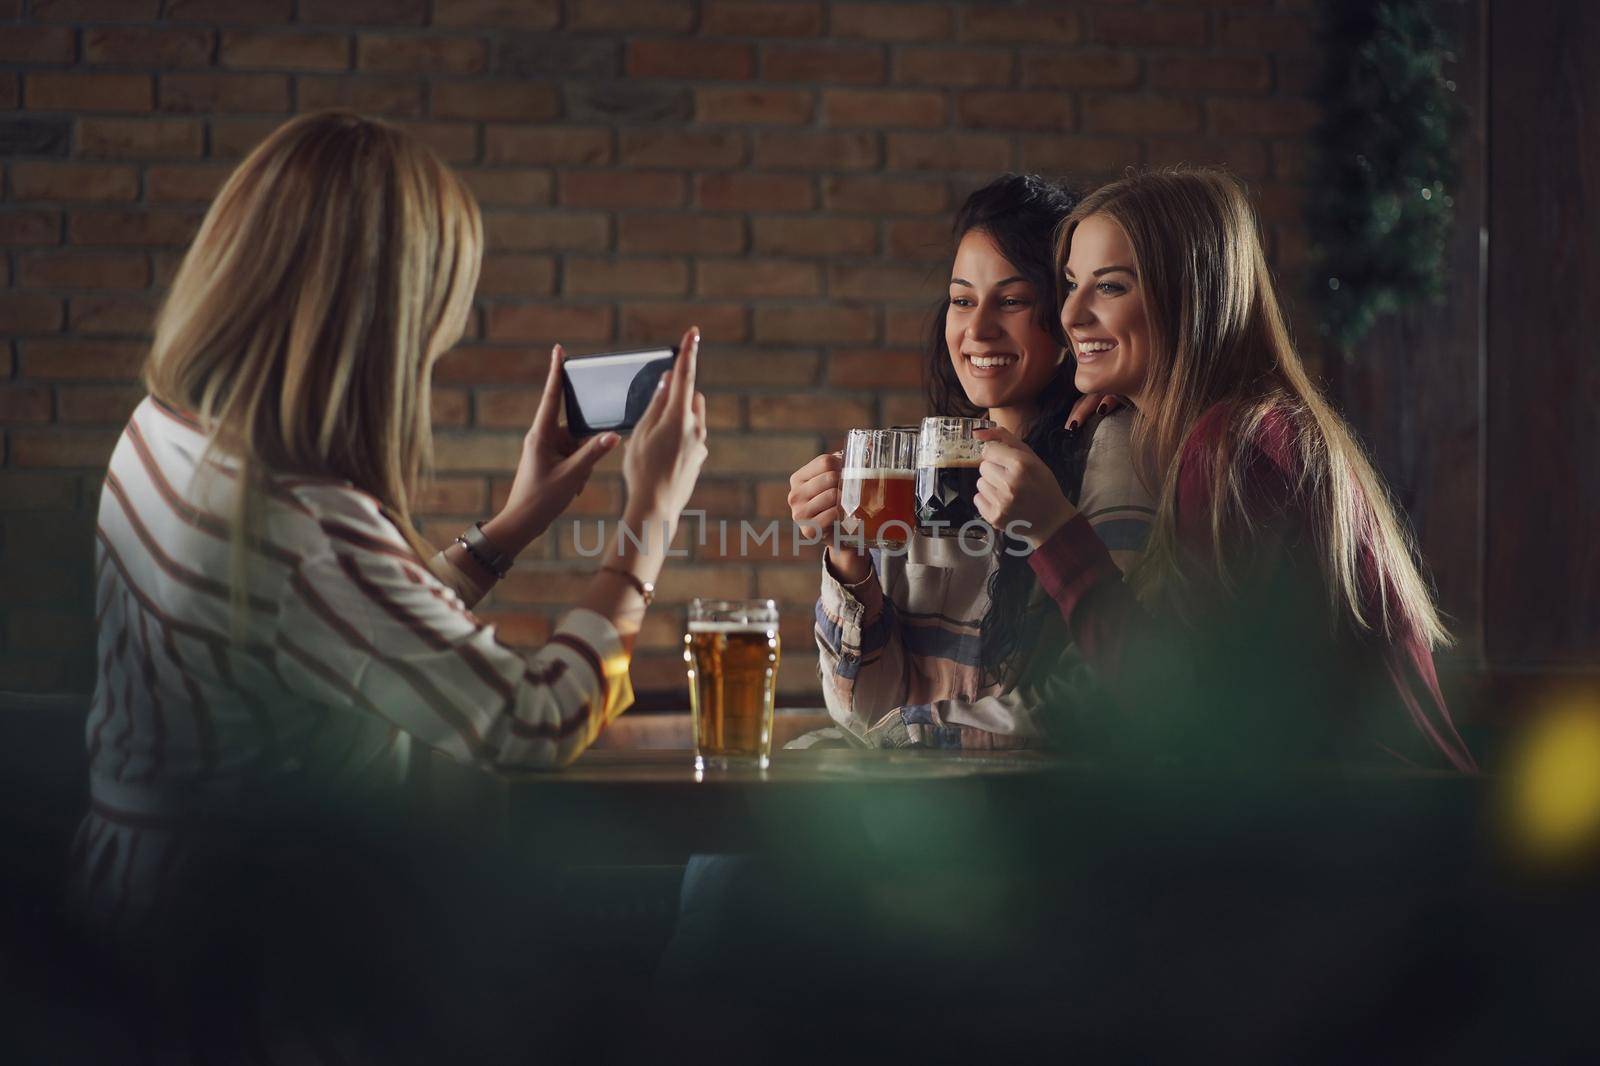 Three happy girlfriends are having fun time in pub. They are talking and drinking beer. Friendship concept.